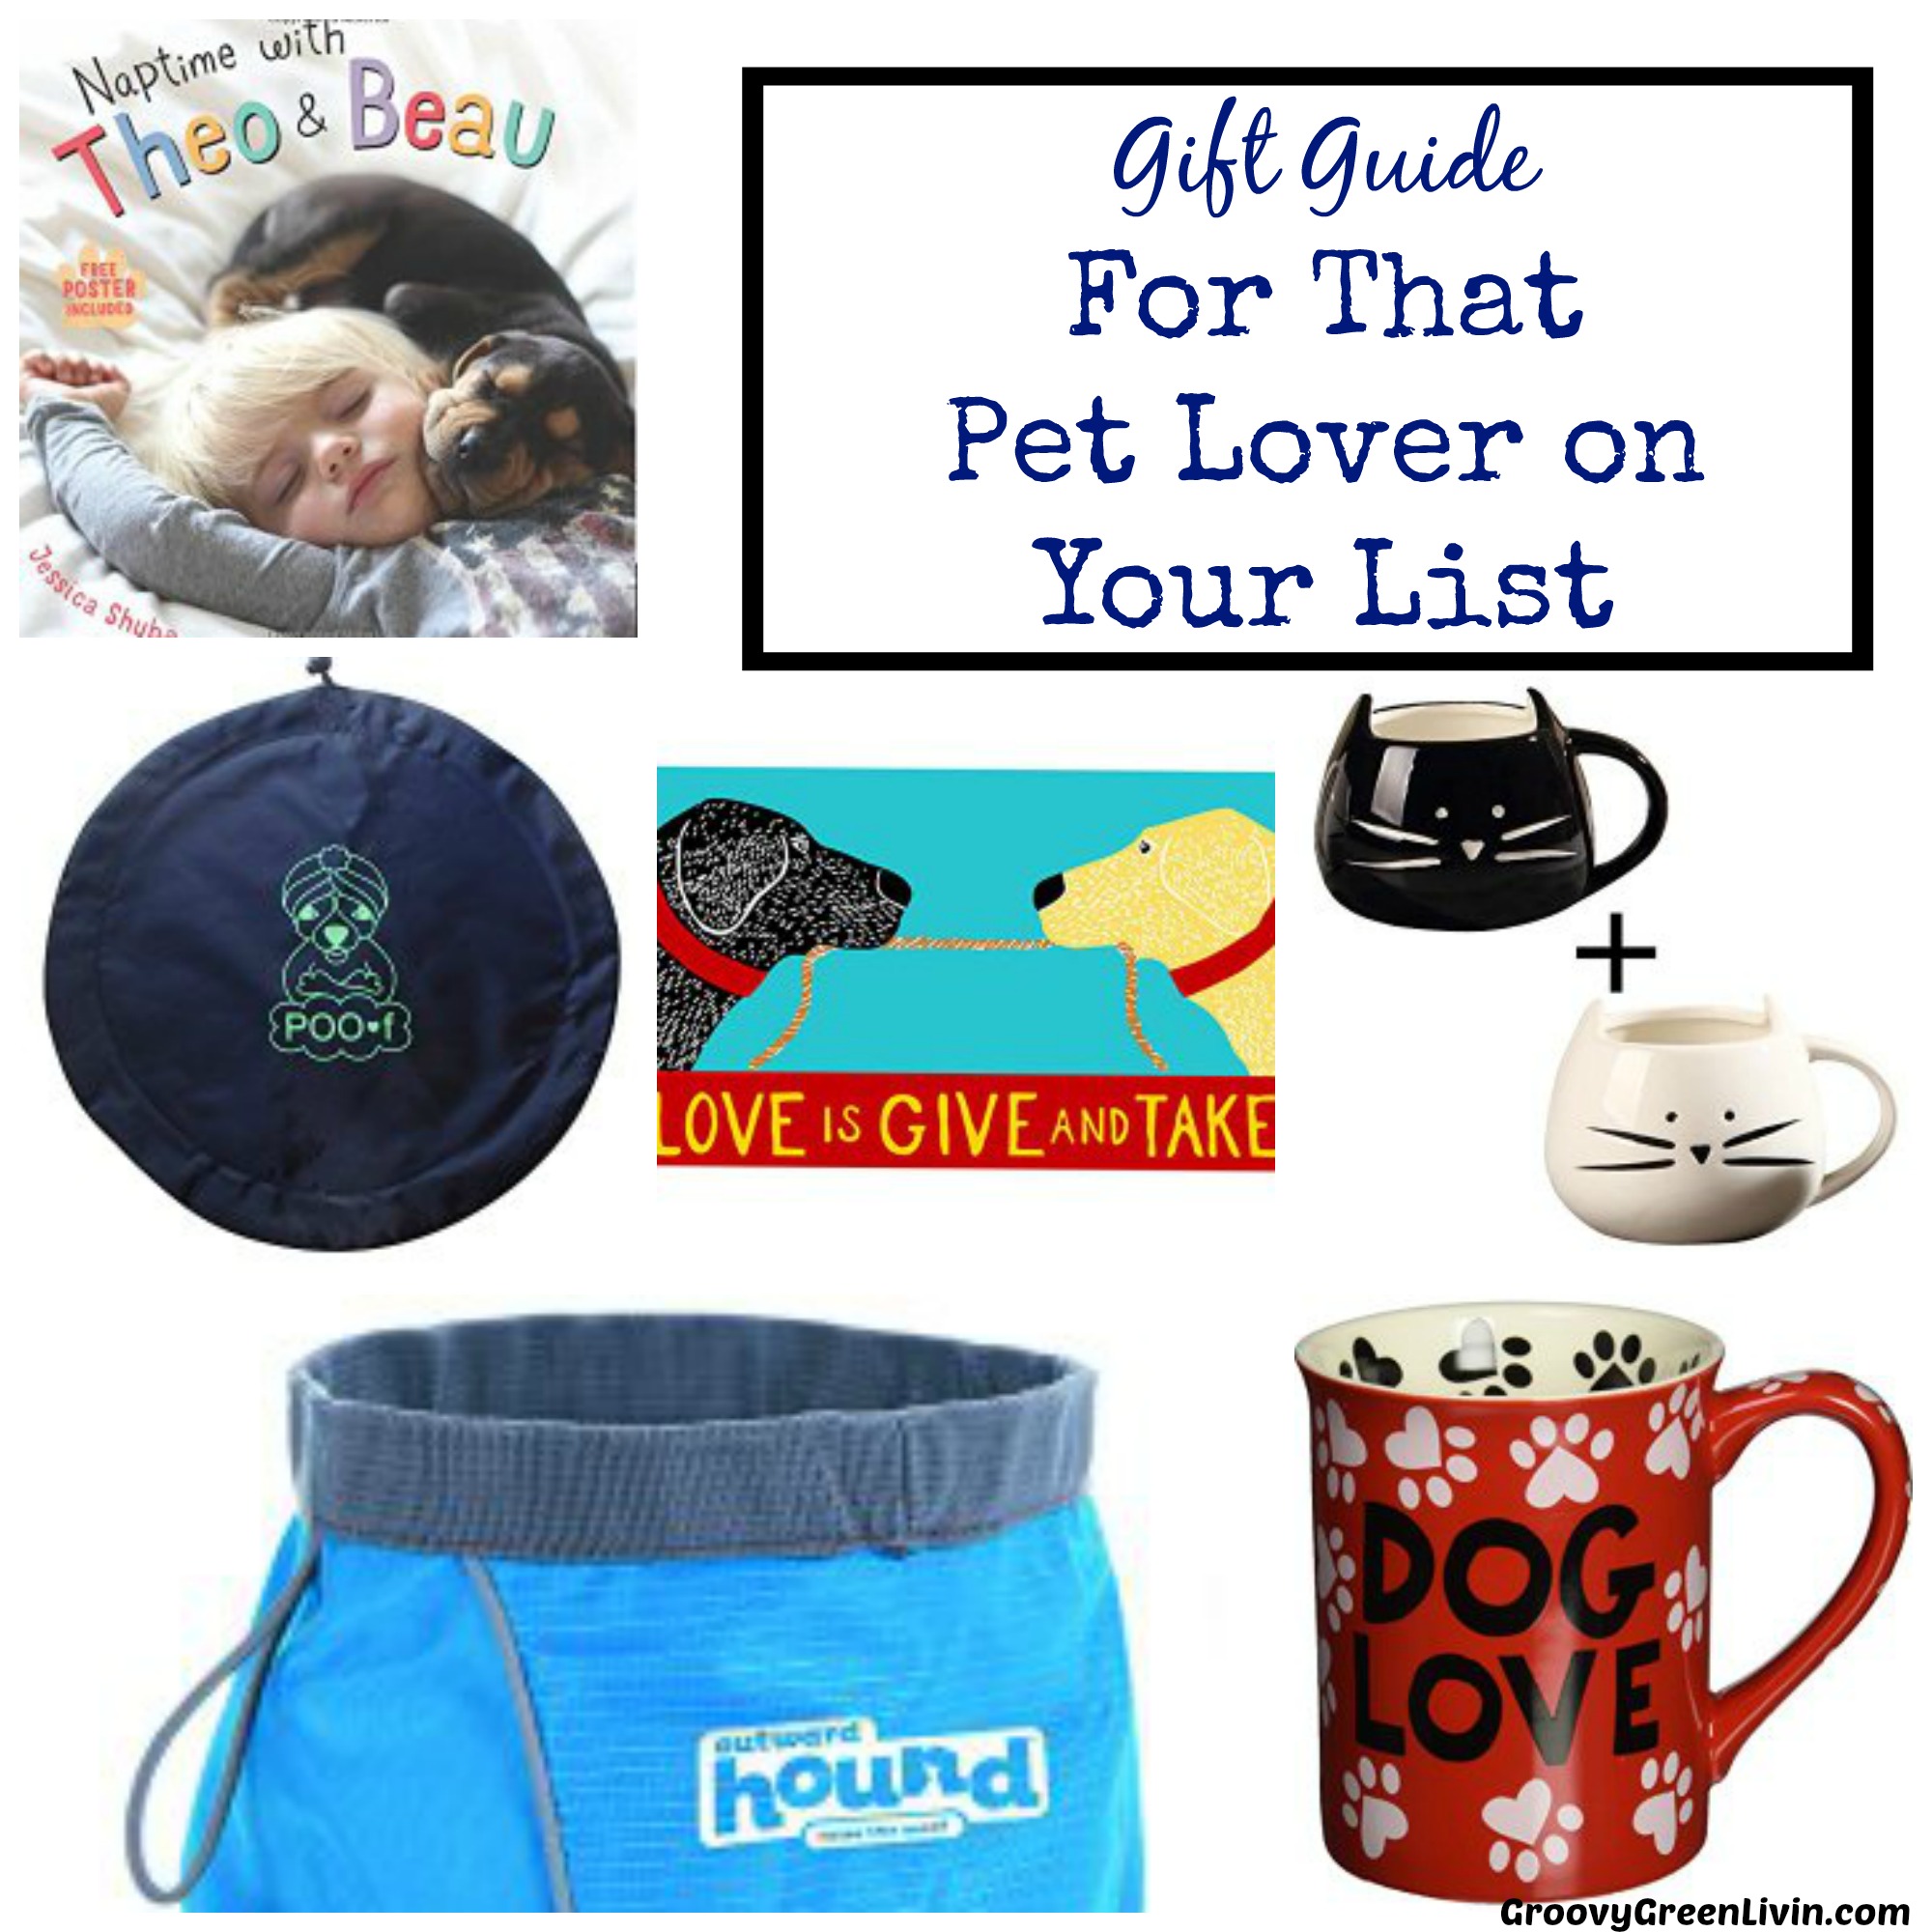 Gift Guide for That Pet Lover on Your List